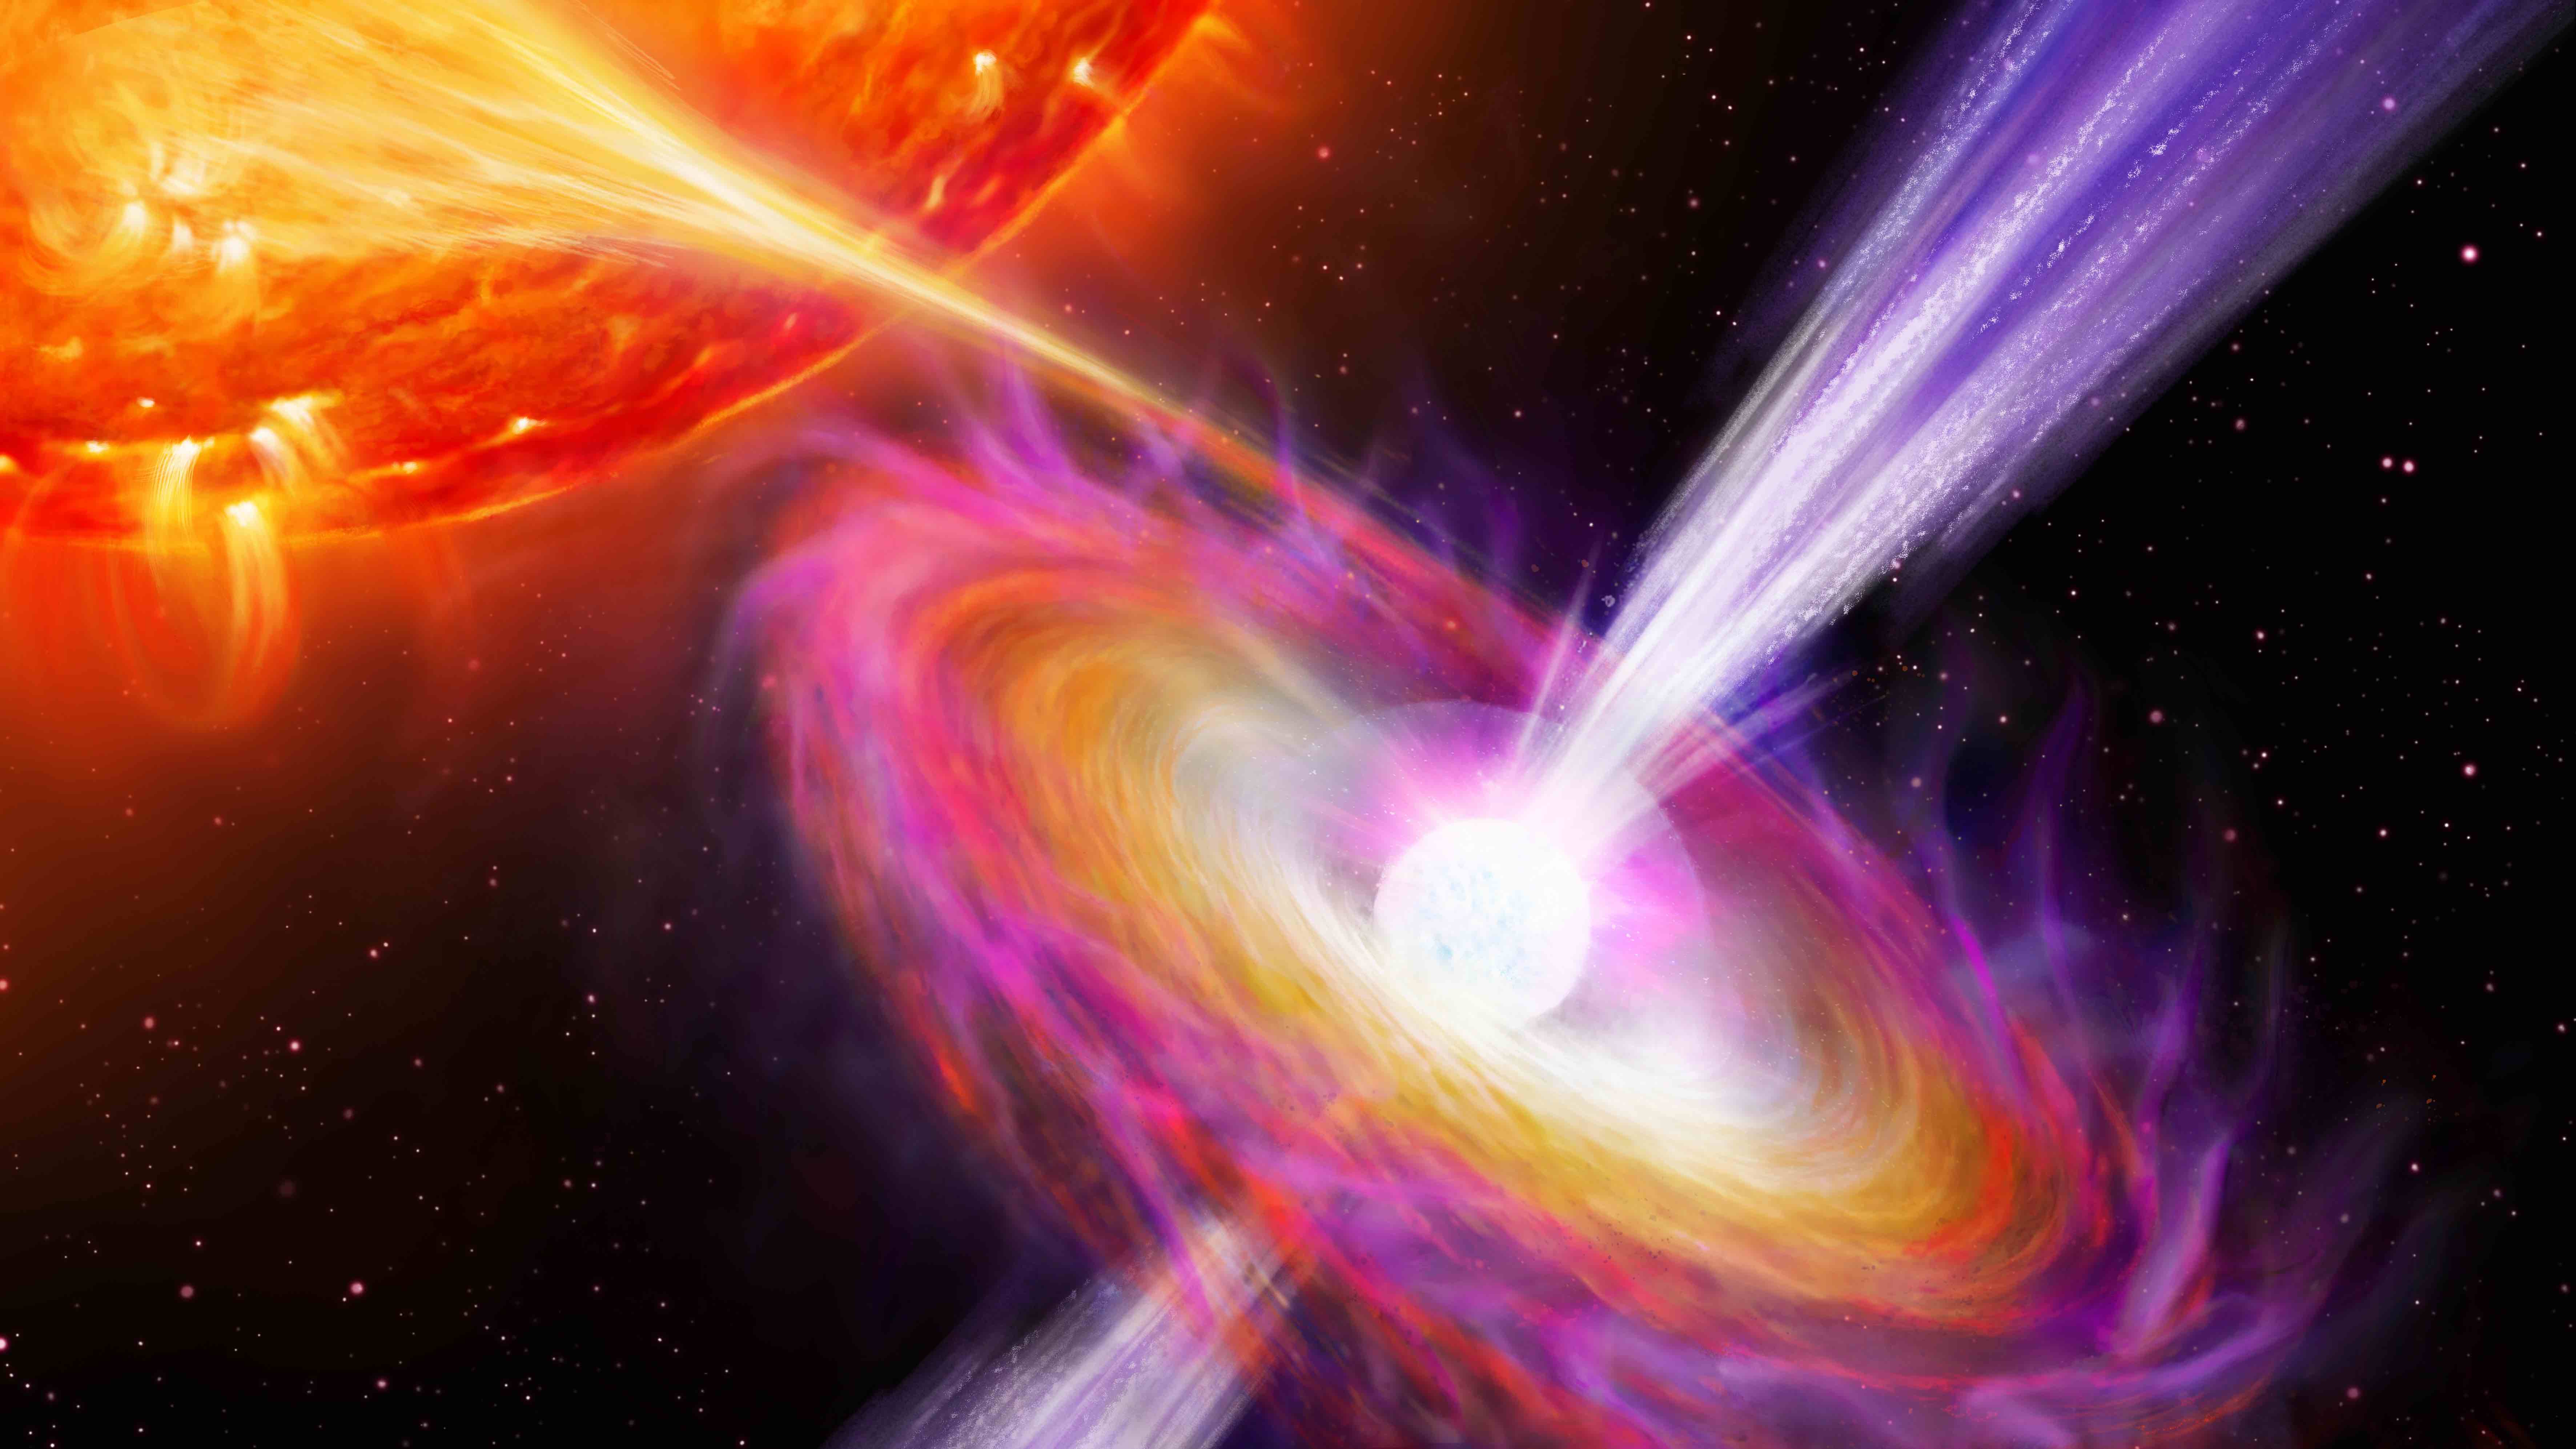 An artist's impression depicting how nuclear explosions on a neutron star feed the jets ejected from its magnetic polar regions.